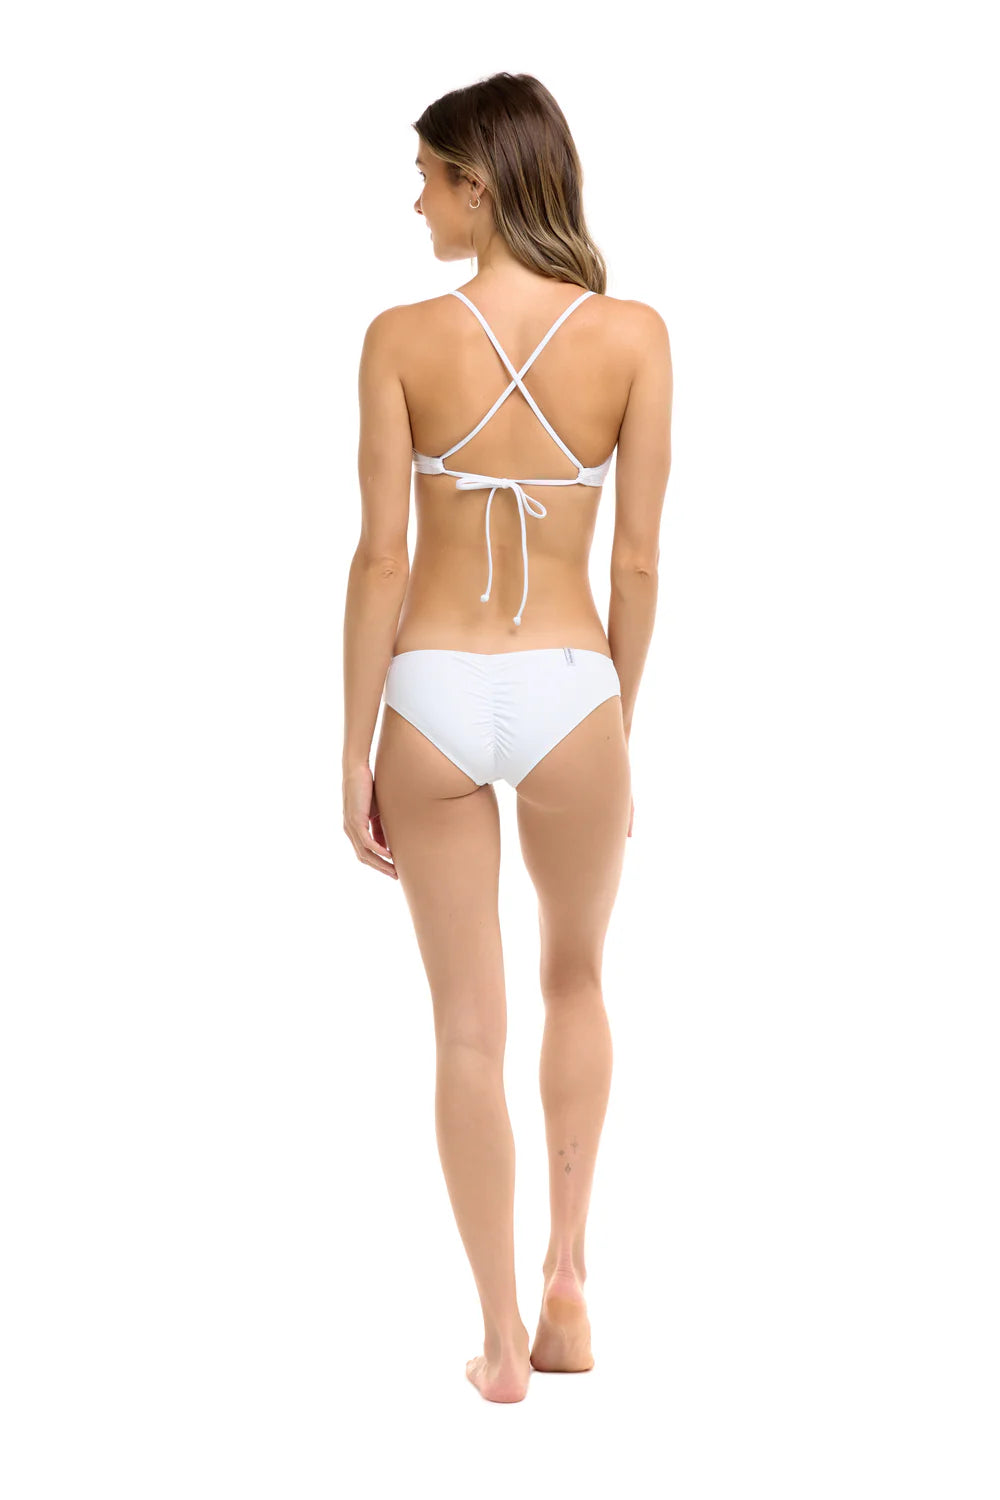 Body Glove Smoothies Patsy Underwire Bra  Nylon/Spandex  Hand wash cold water Top and bottom sold separately Back View